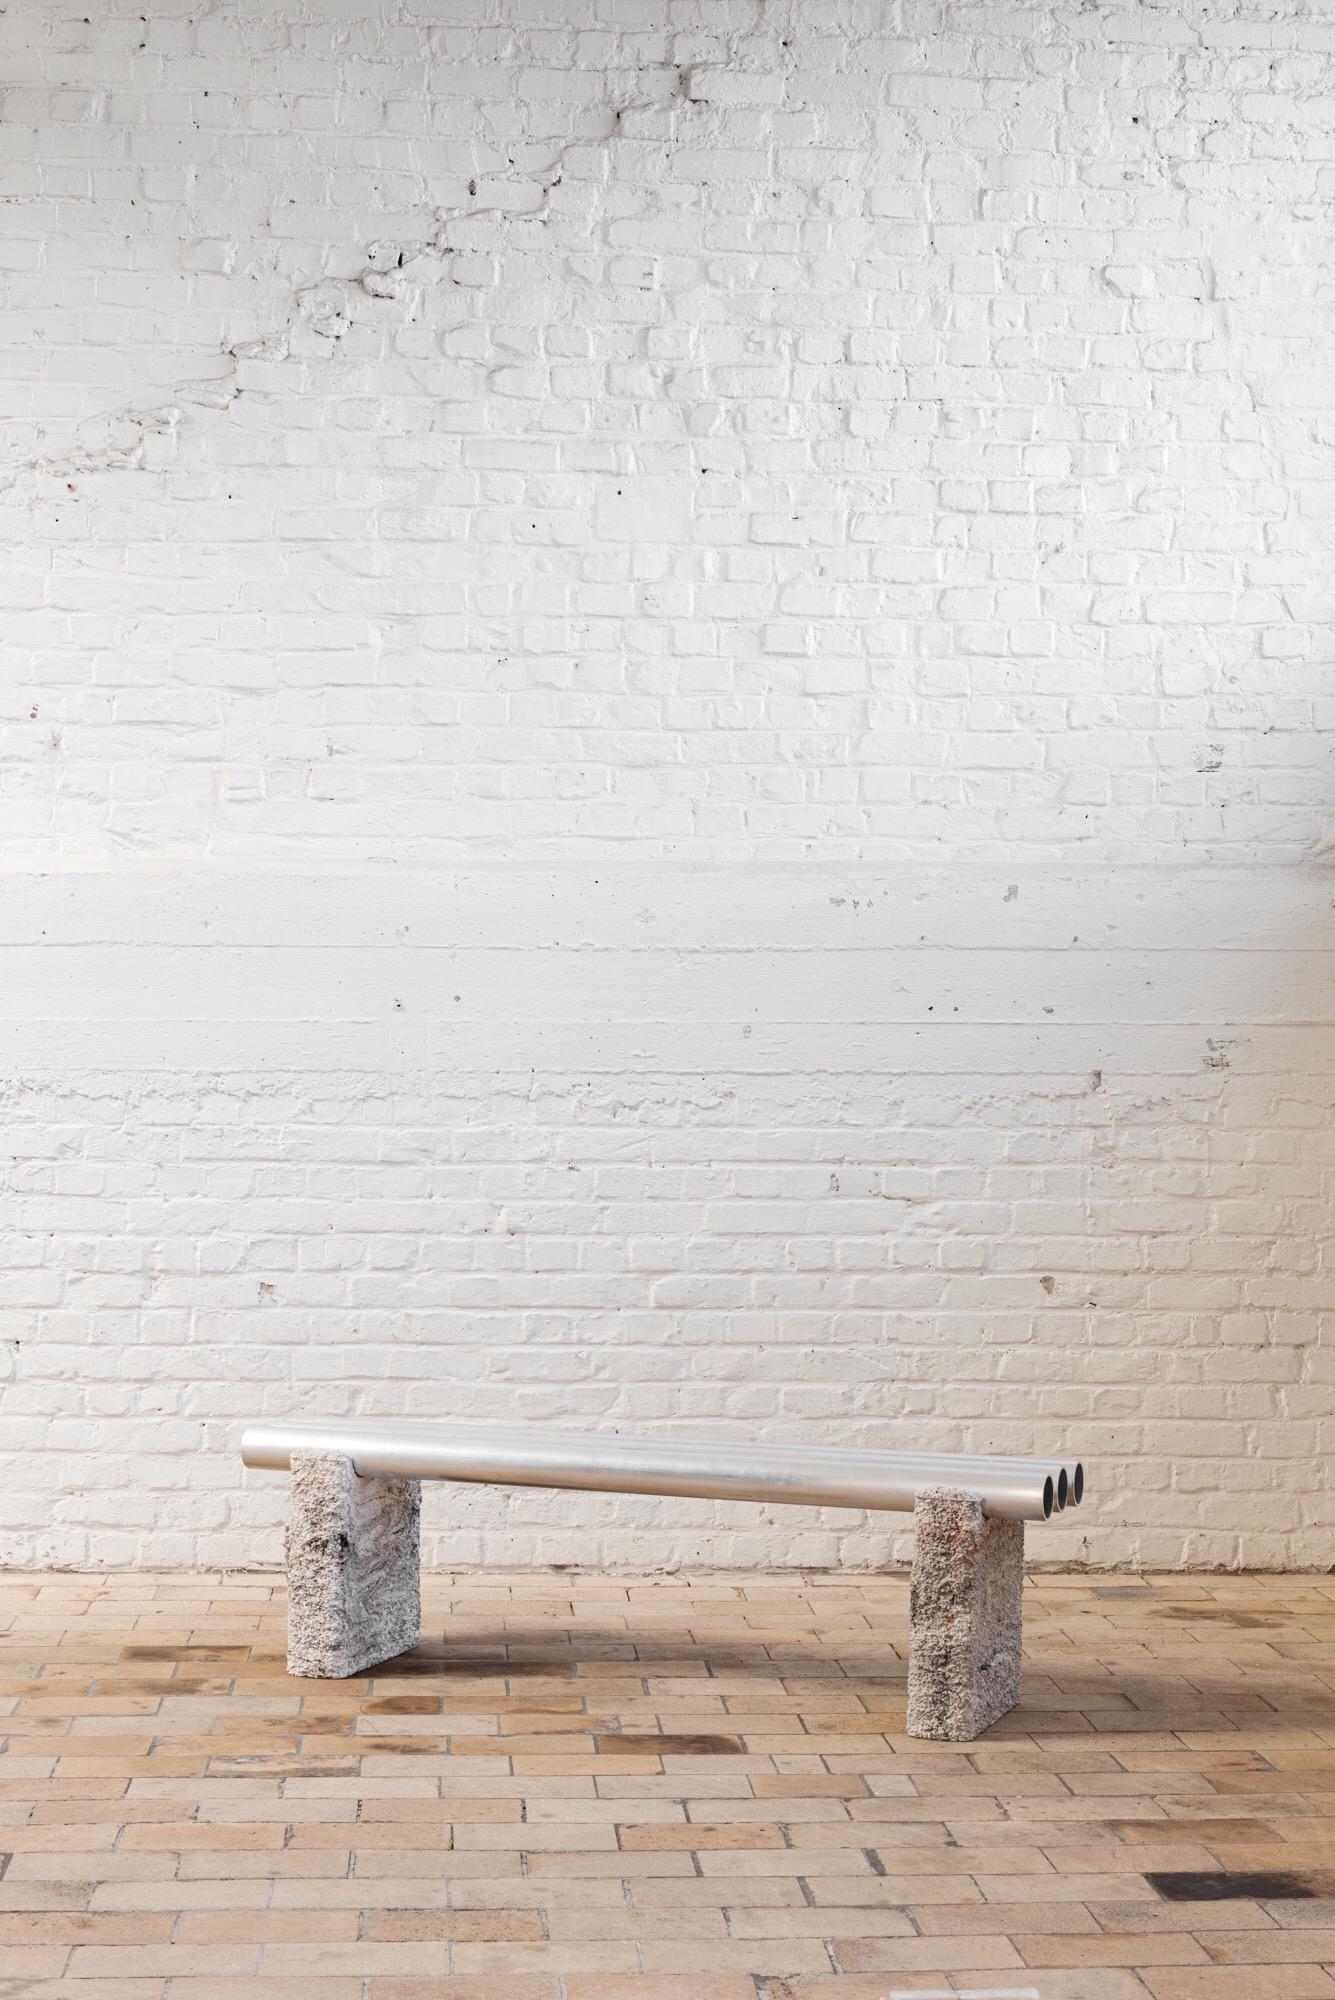 Foam bench by Arne Desmet
Dimensions: D150 x W34 x H 44 cm
Materials: Base: casted white concrete with color pigment, tubes: aluminium.

Foam bench is composed of two concrete blocks and 3 extruded aluminium tubes. The mold for the concrete